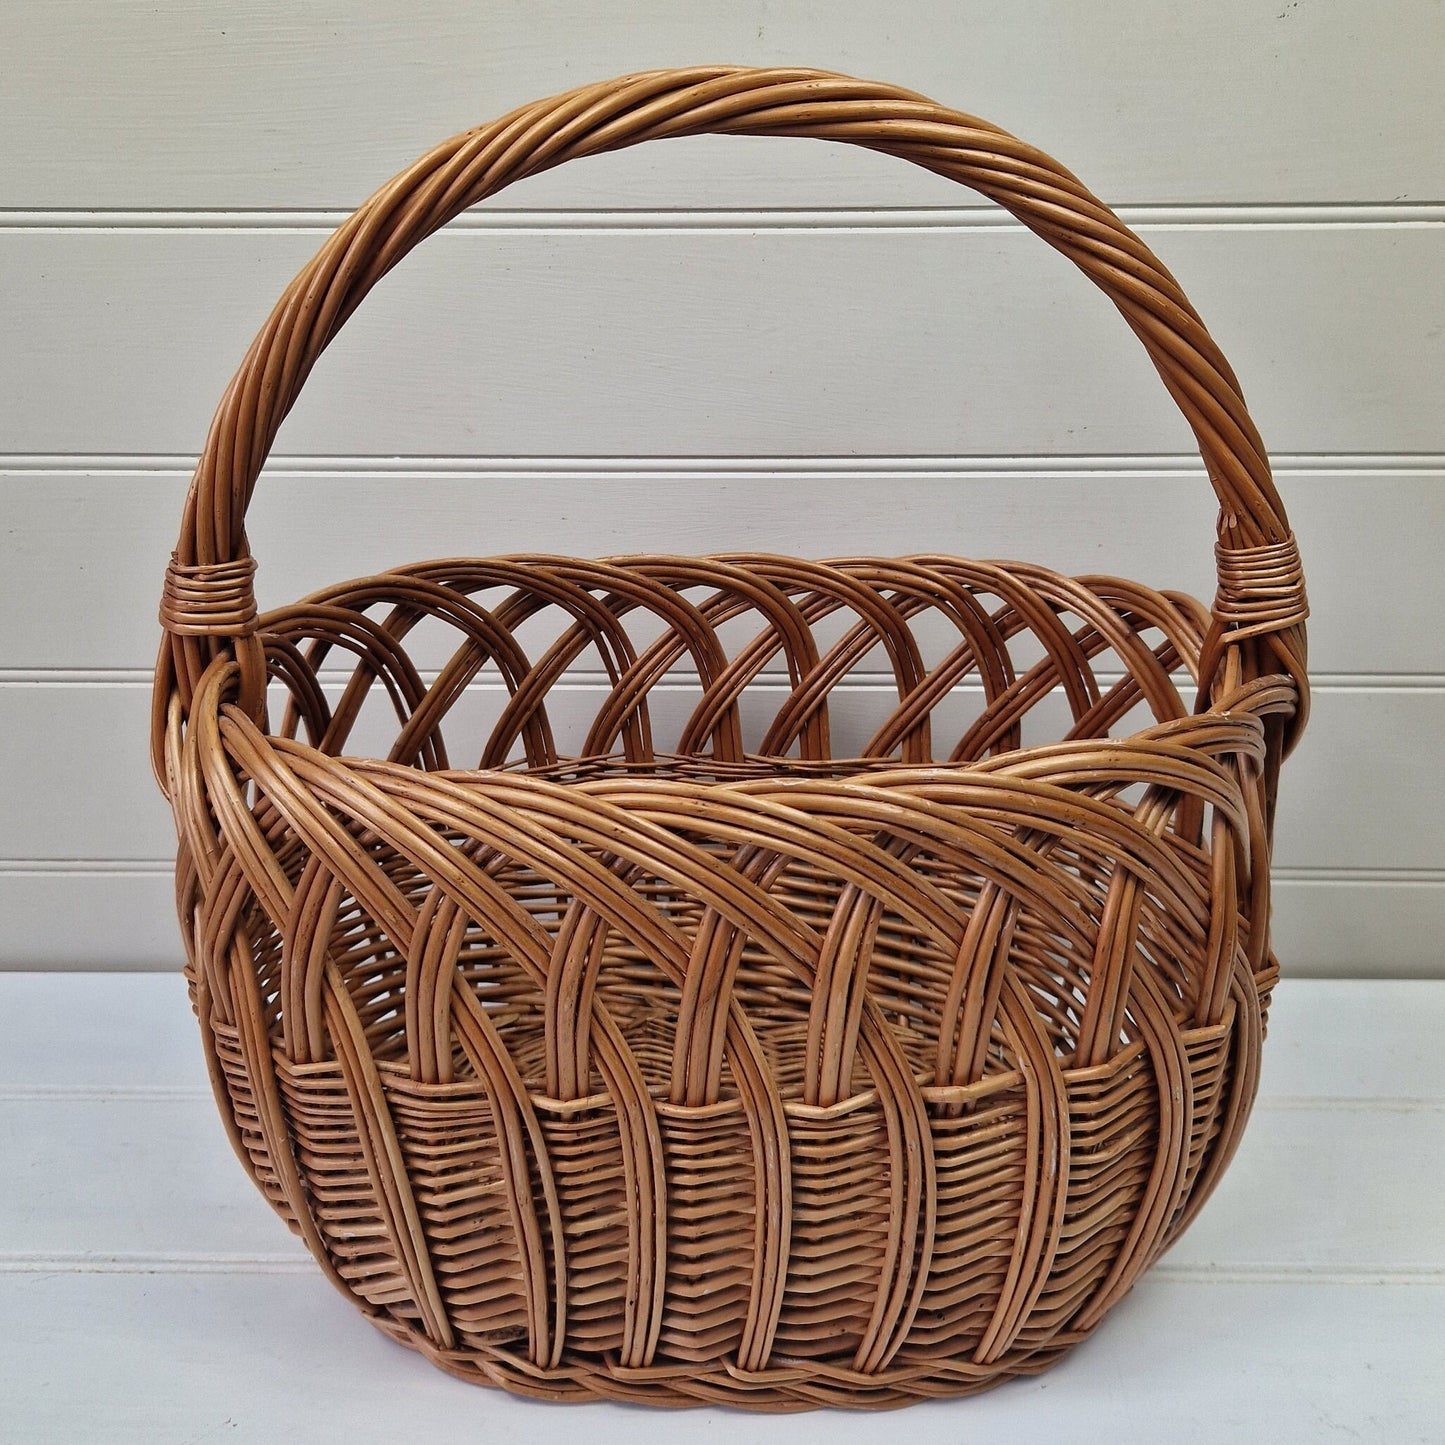 Vintage shopping basket French handmade market basket with intricate pattern Traditional wicker shopper Carry fruit/vegetables/eggs/flowers